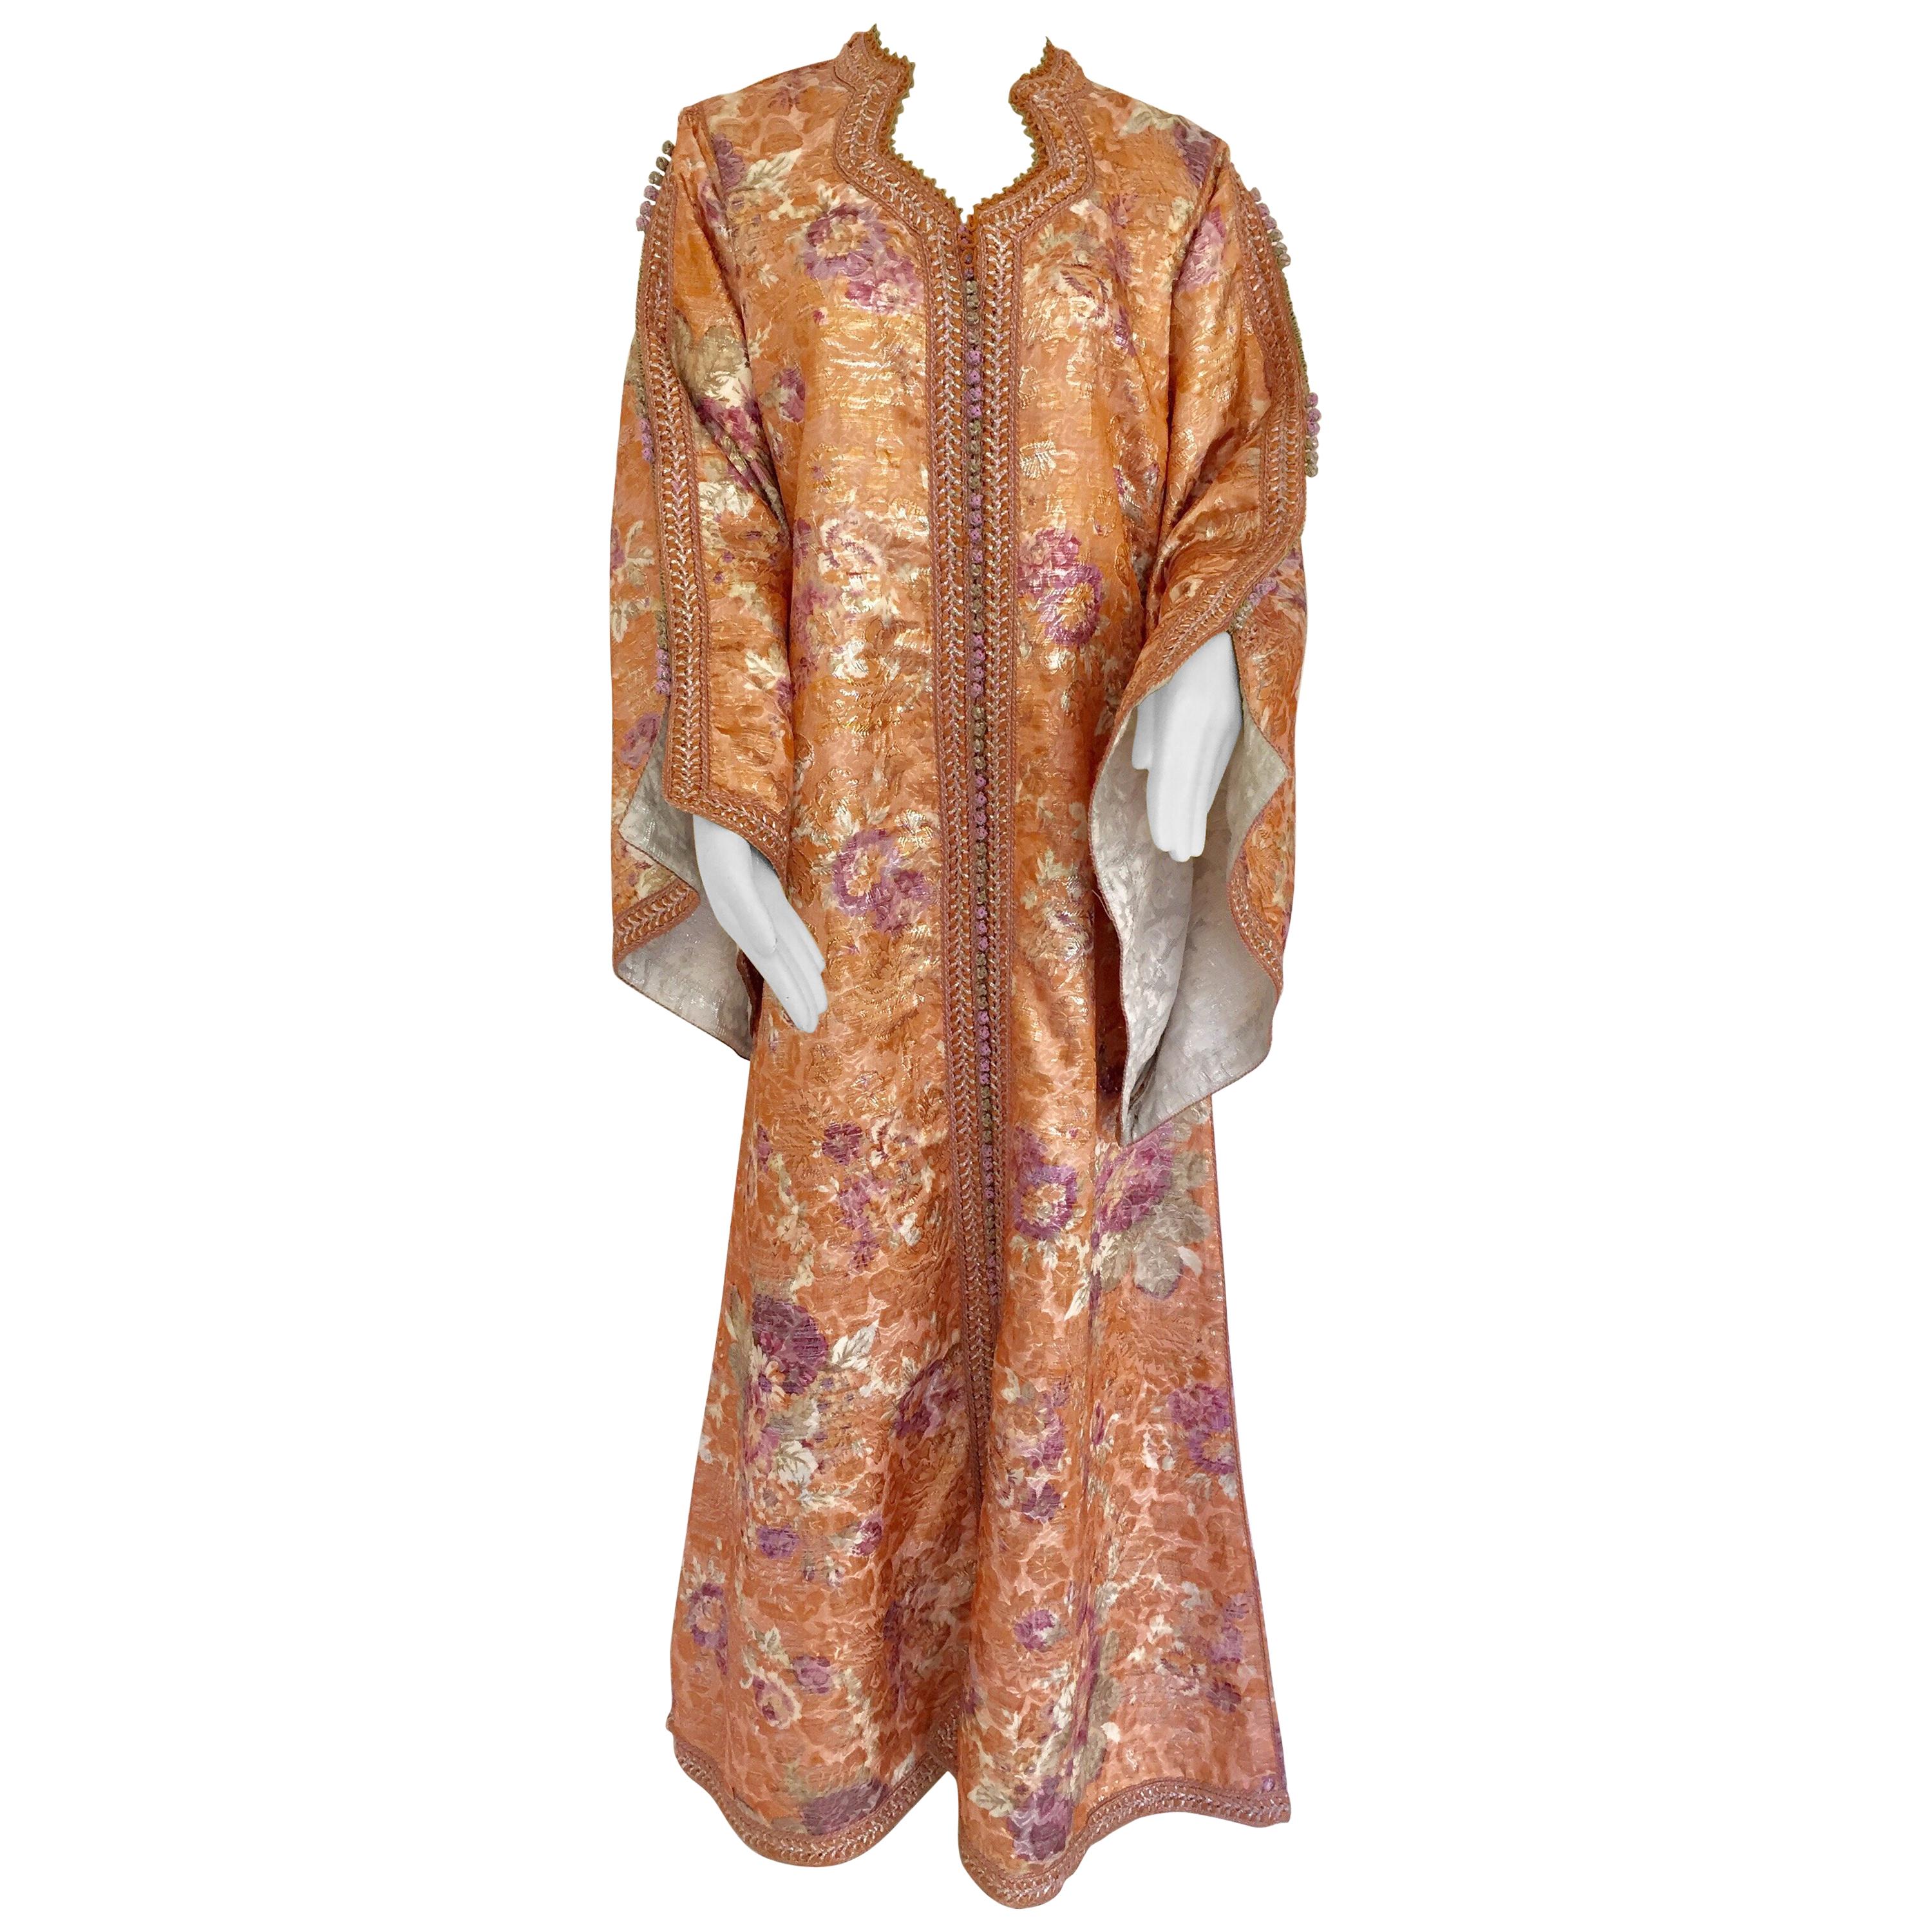 Moroccan Kaftan Orange and Purple Floral with Gold Embroidered Maxi Dress Caftan For Sale